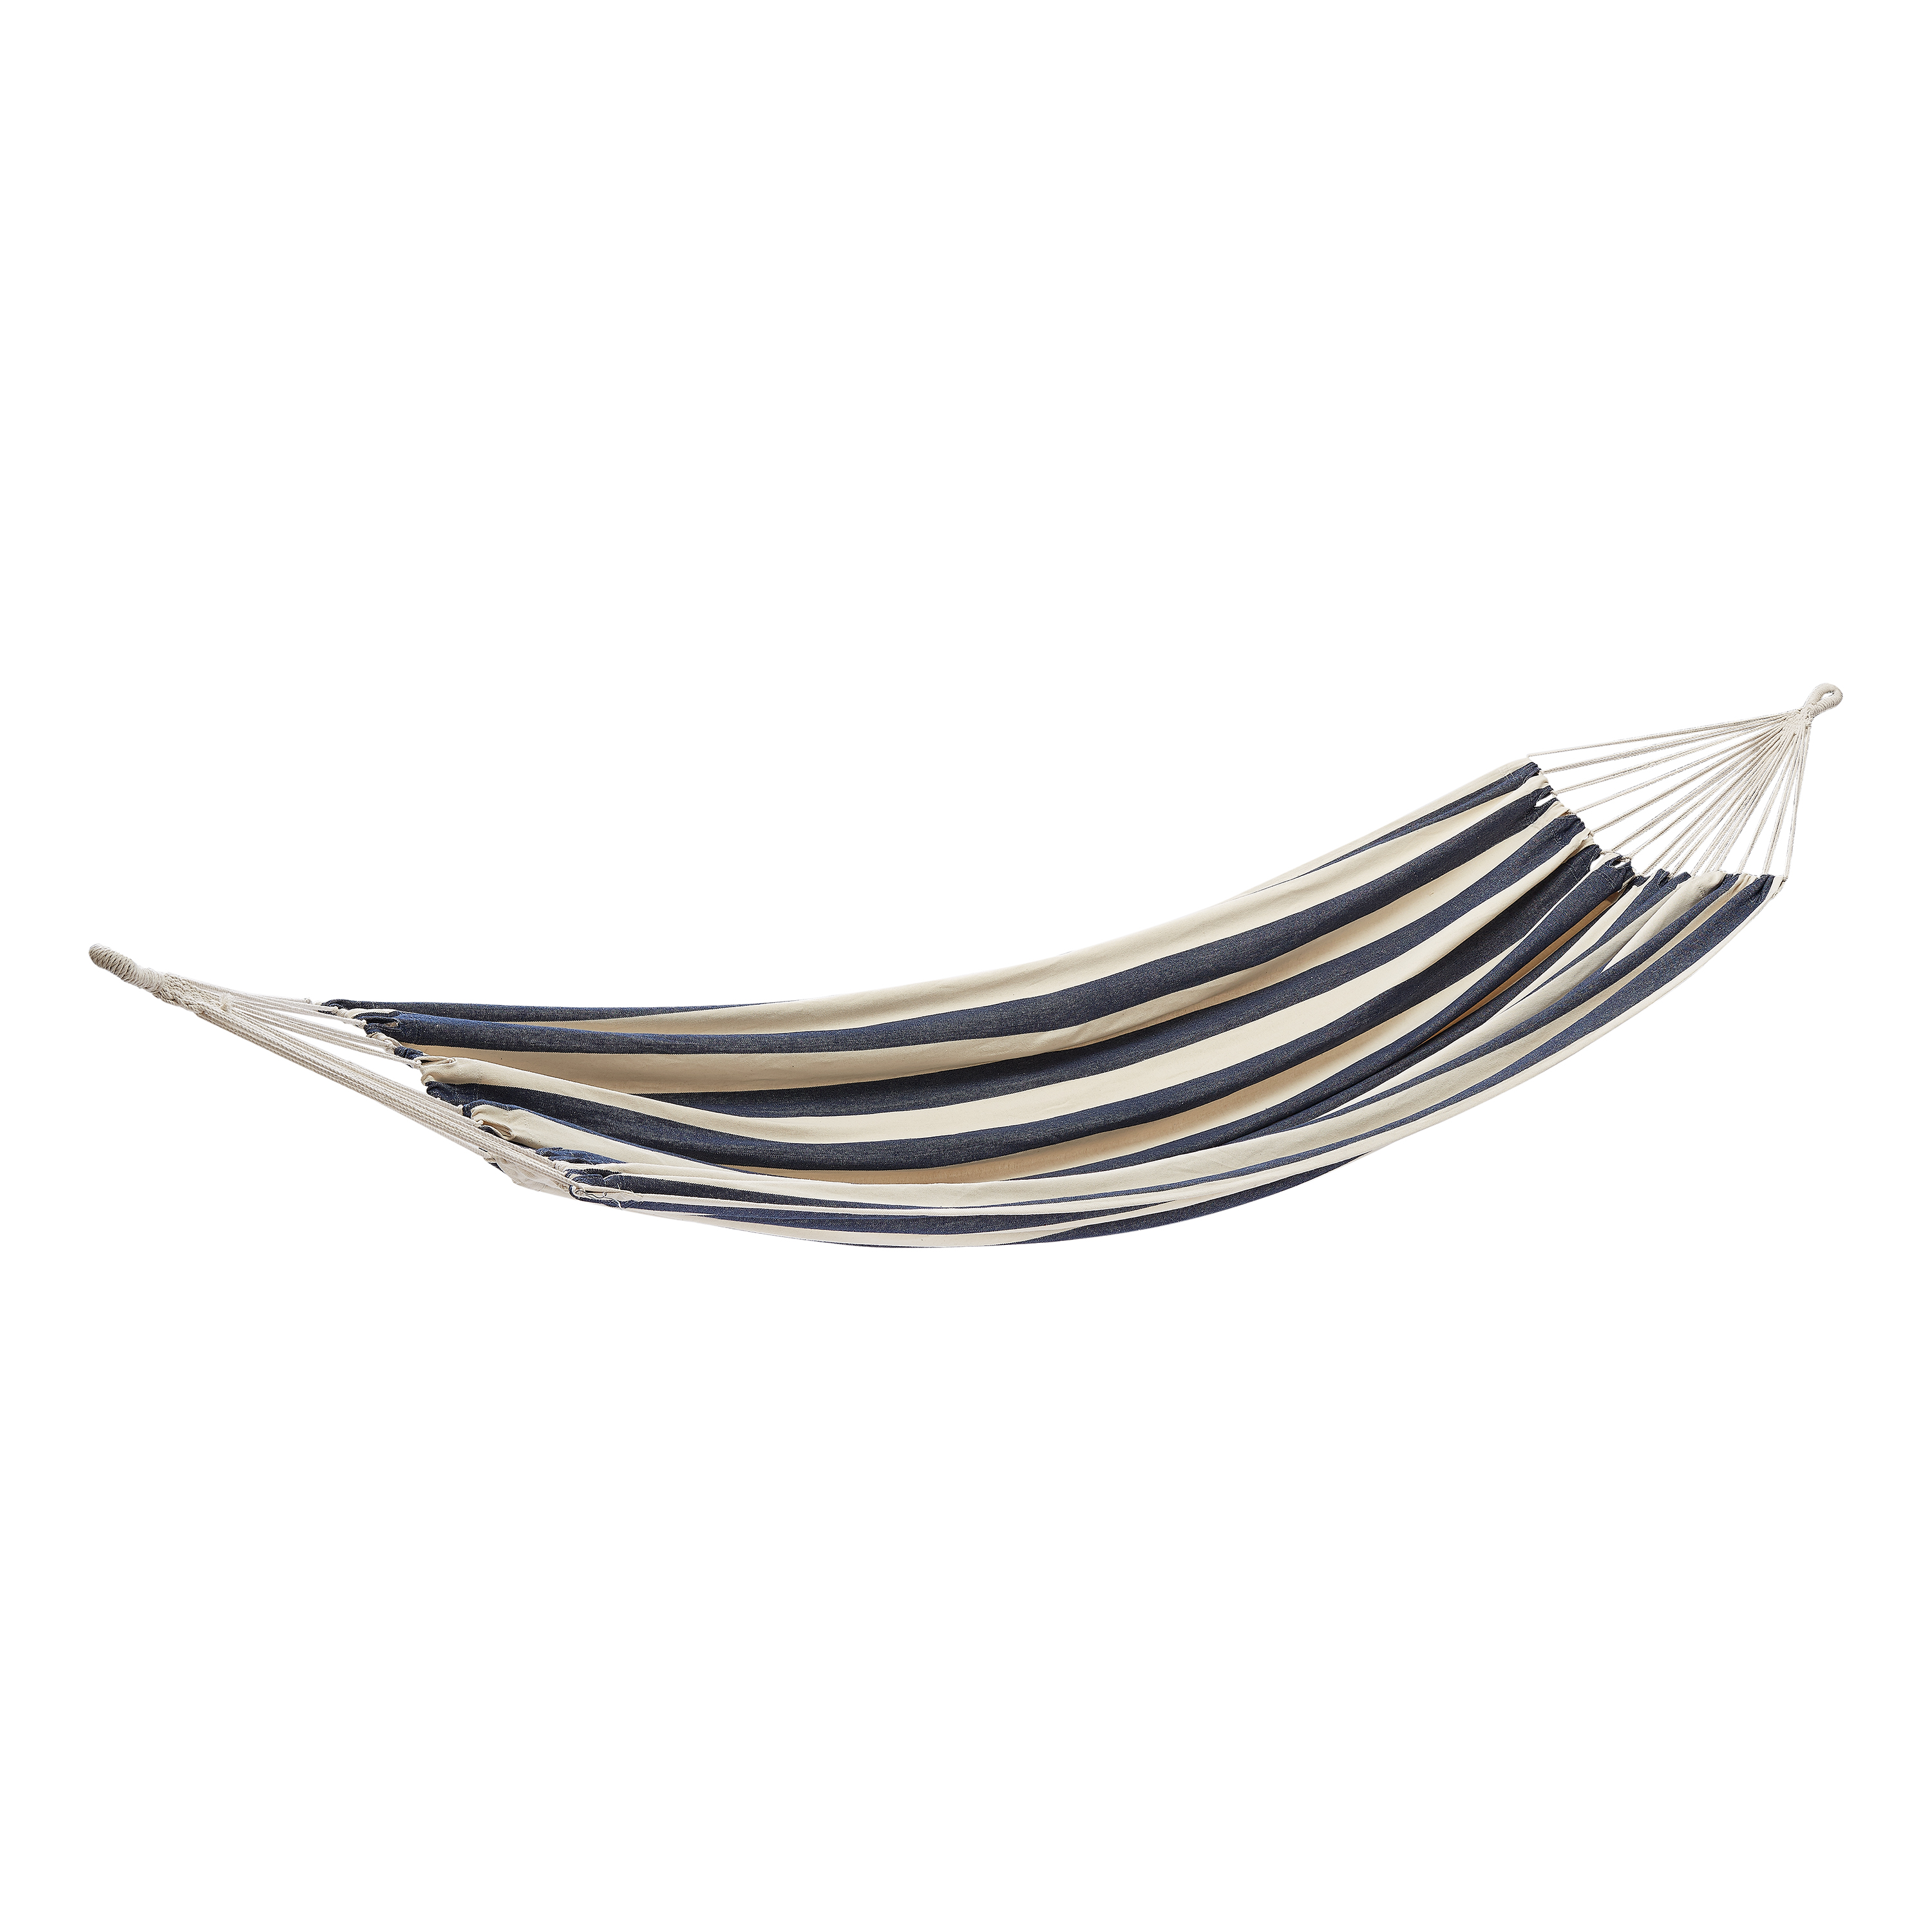 Mainstays Palco black and White Striped Hammock in a Bag, Hammock Size 98.43 x 59.06" (L x W), Load Capacity 250 Lbs - image 2 of 6